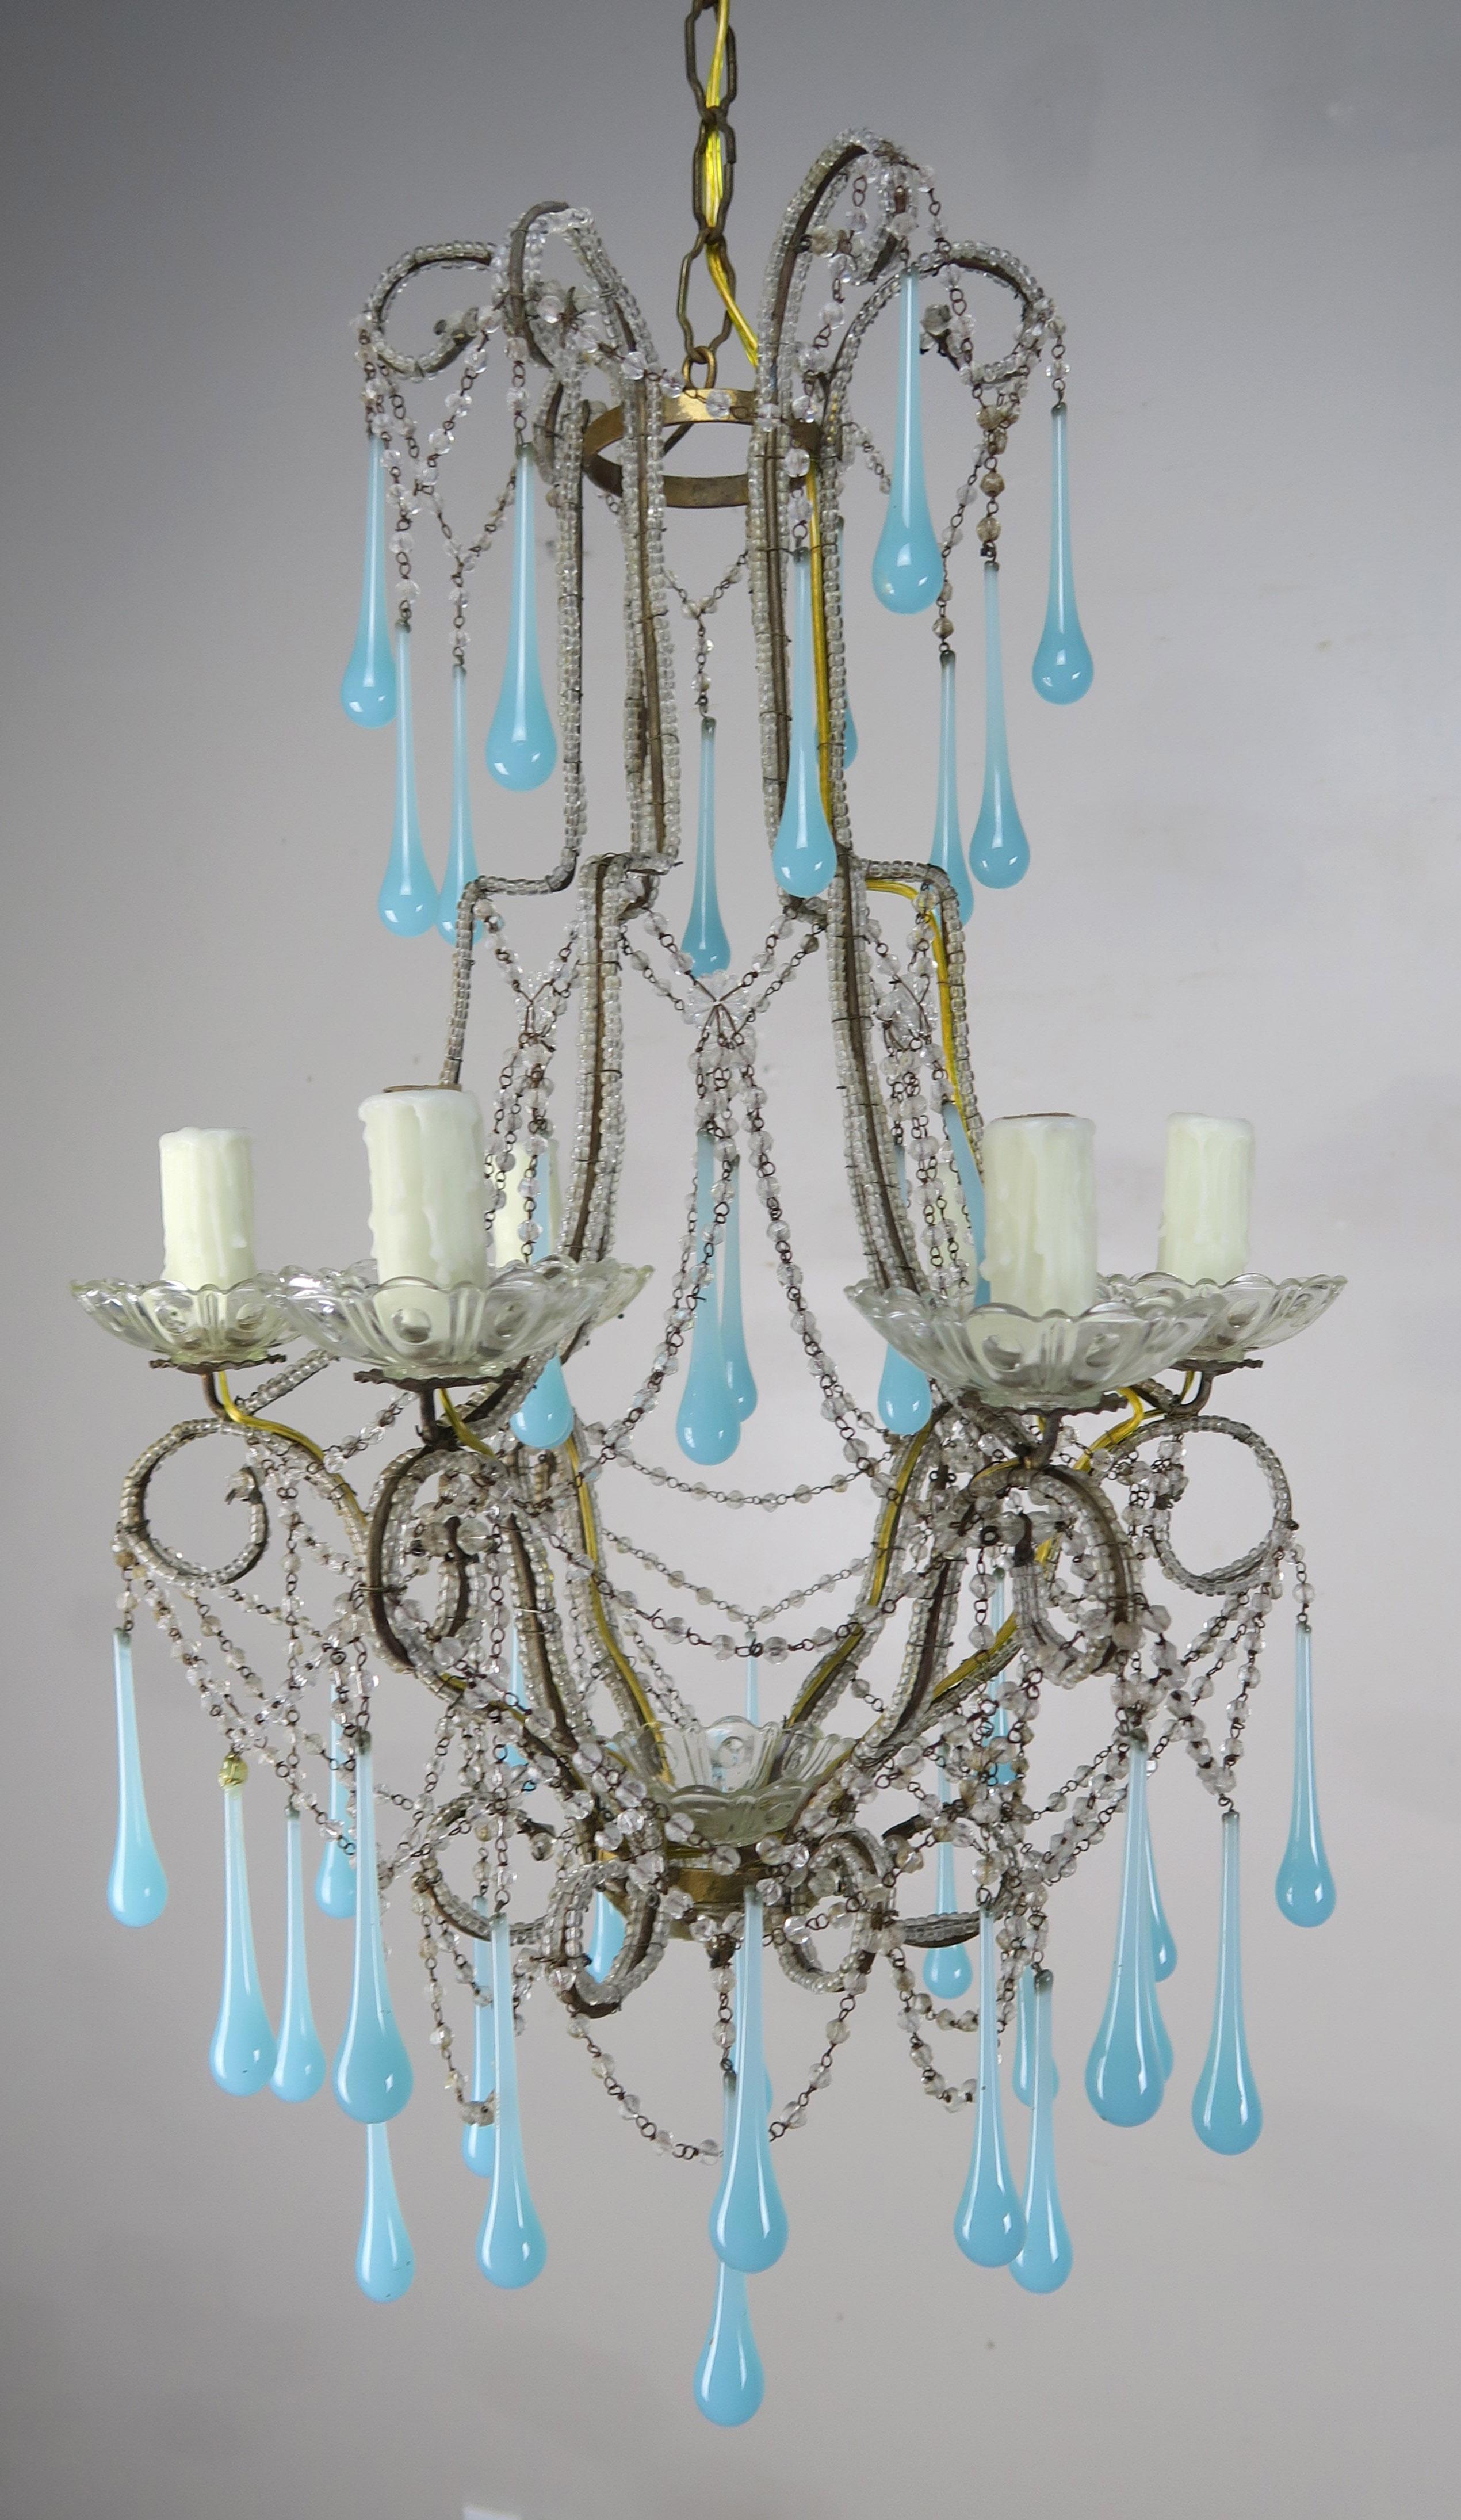 Six-light crystal beaded chandelier with long aqua hand blown glass drops. The chandelier is draped with garlands of English cut beads. We have had the fixture newly rewired with drip wax candle covers. The chandelier includes chain adn canopy and